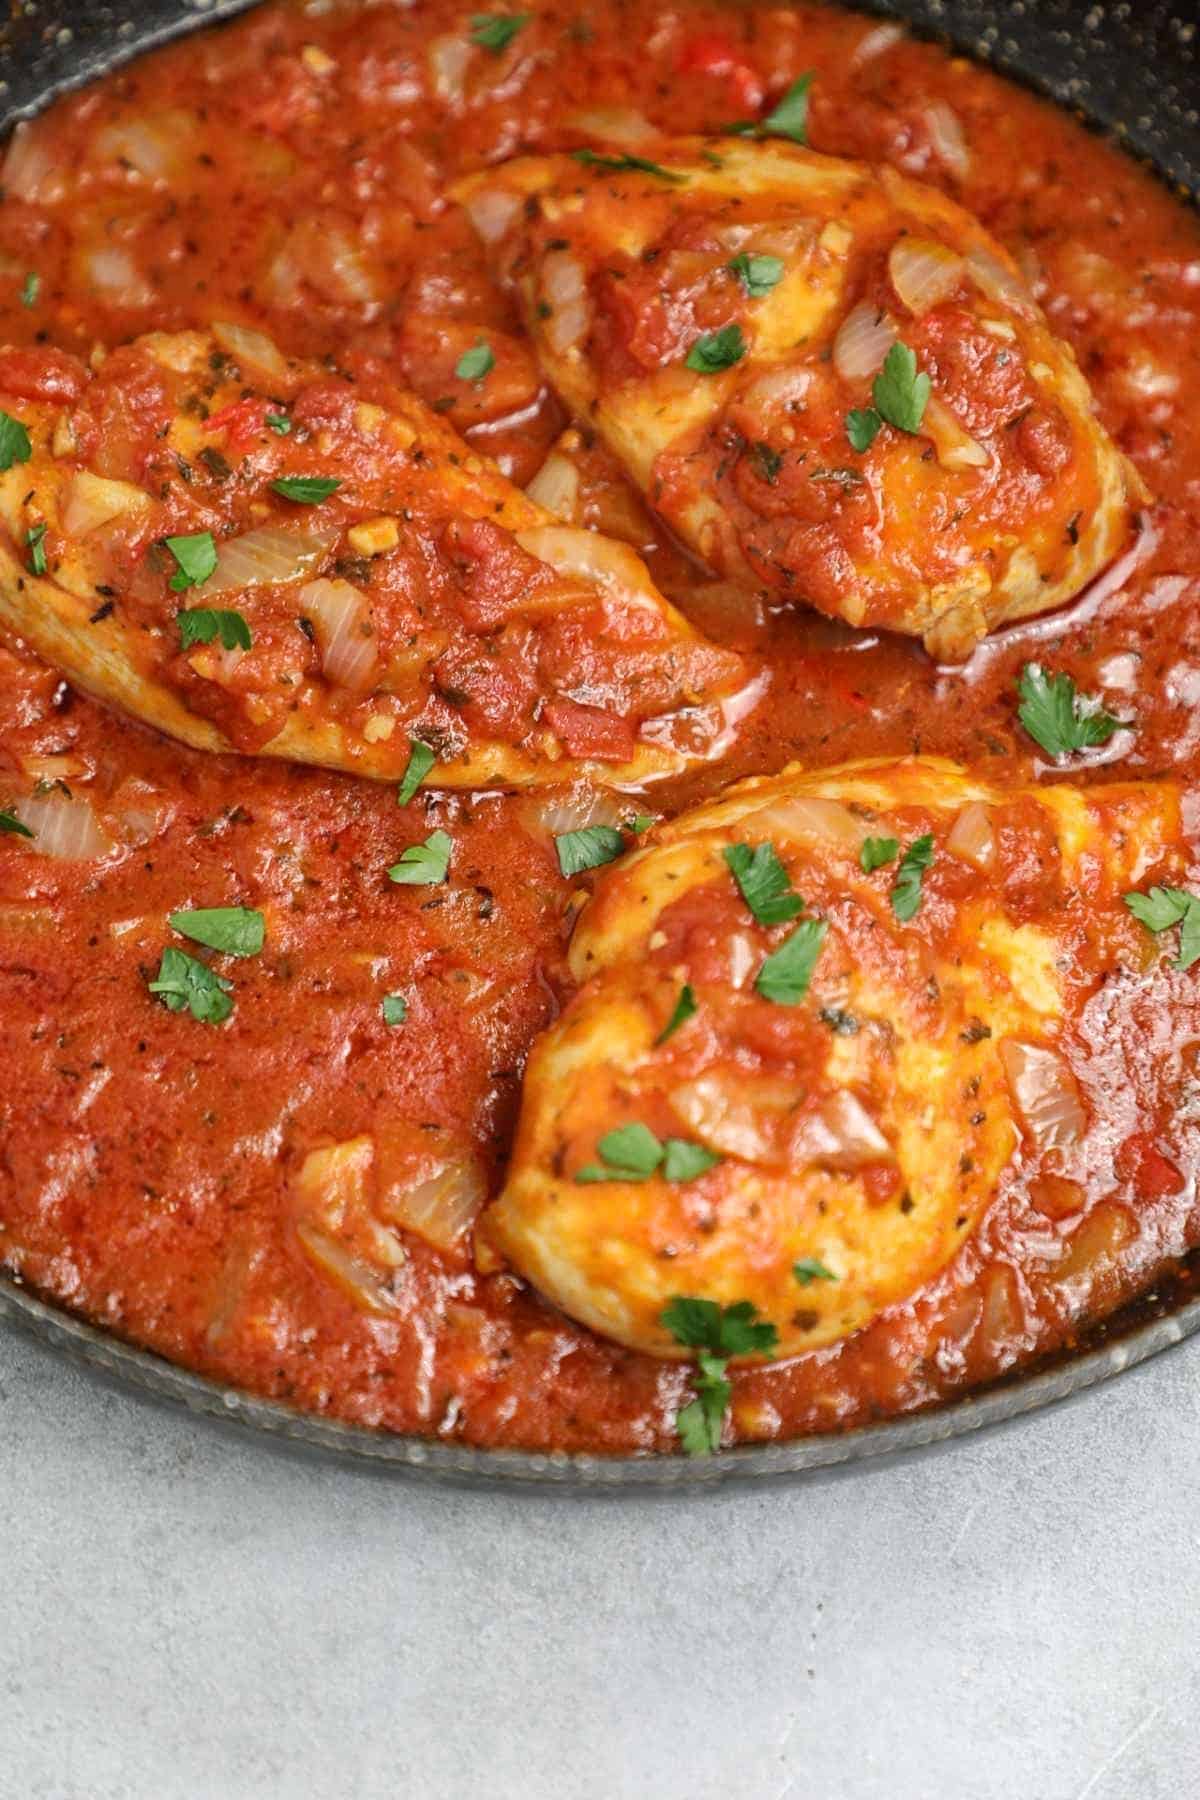 cooked chicken in tomato sauce in a skillet.